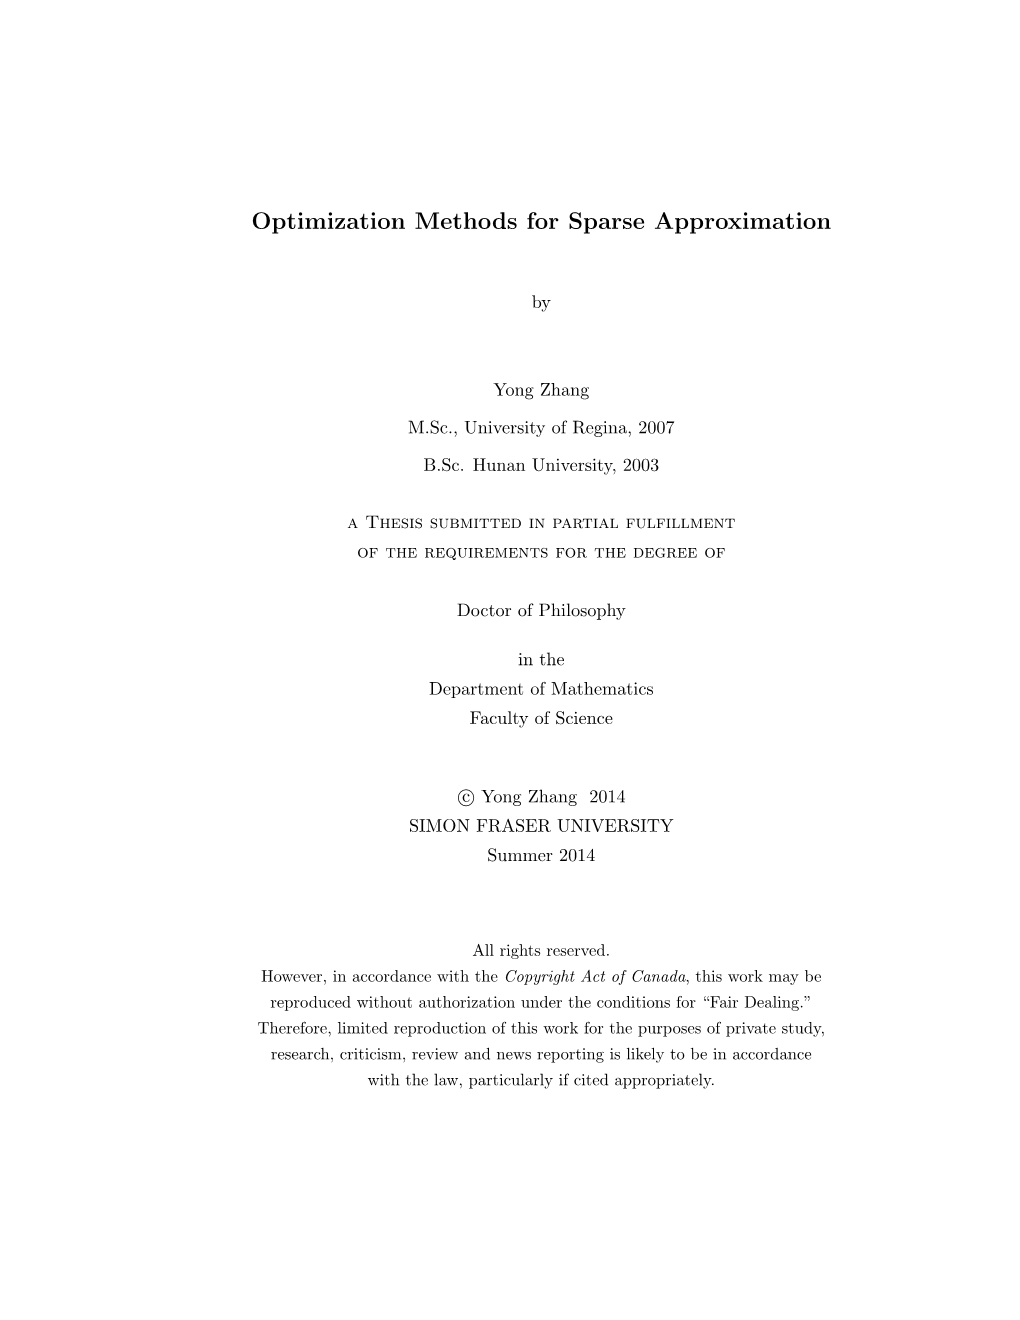 Optimization Methods for Sparse Approximation